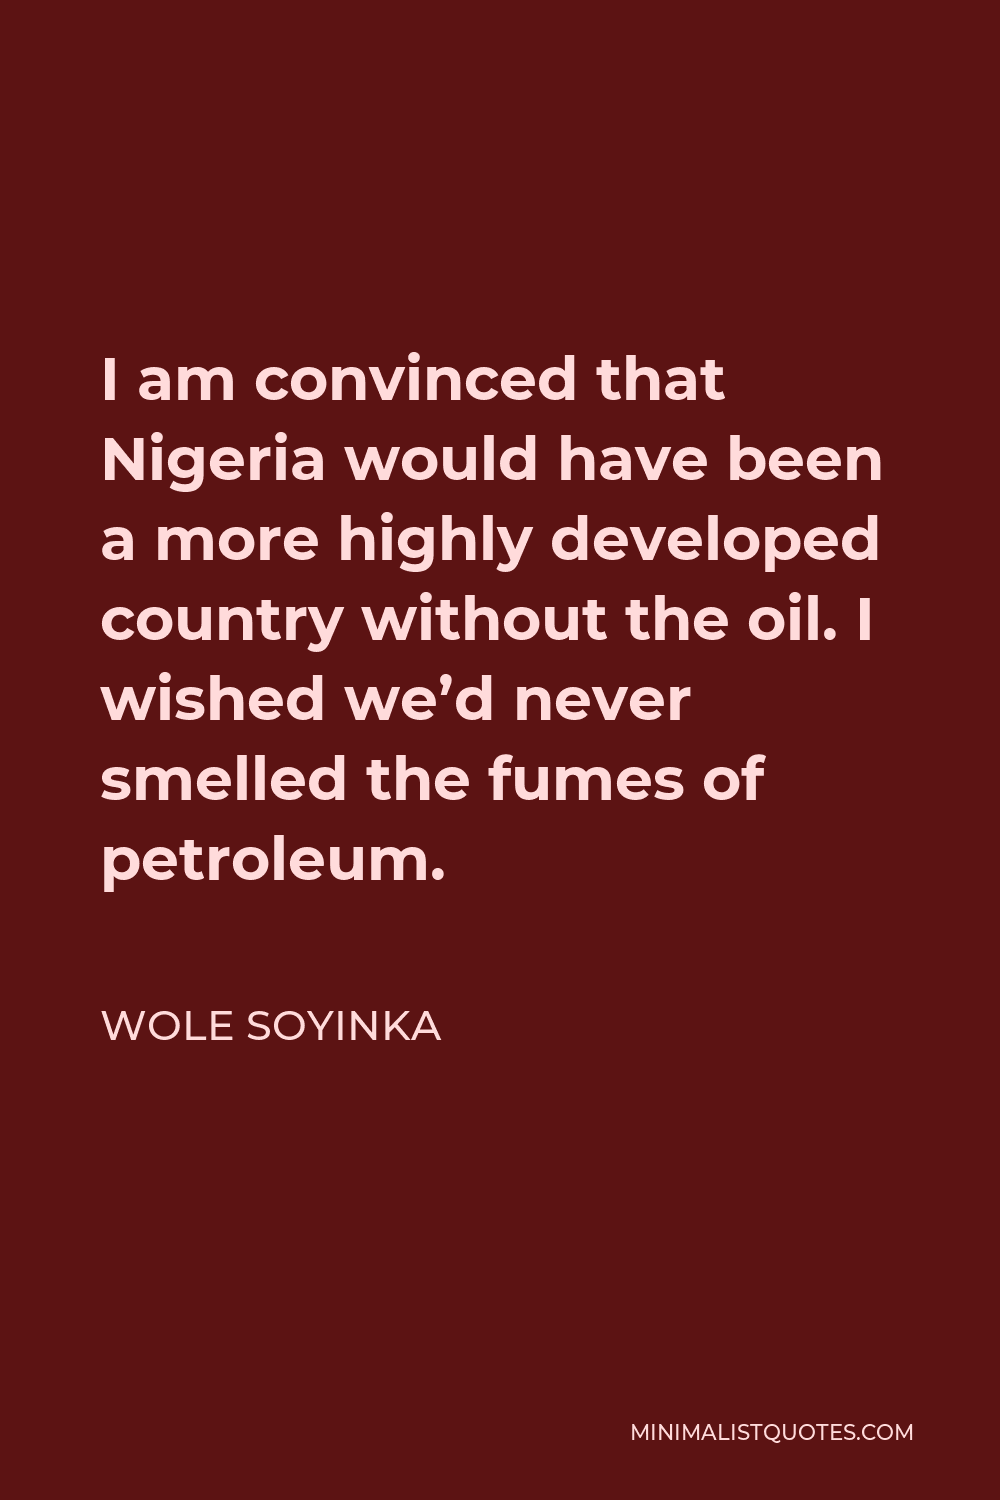 Wole Soyinka Quote - I am convinced that Nigeria would have been a more highly developed country without the oil. I wished we’d never smelled the fumes of petroleum.